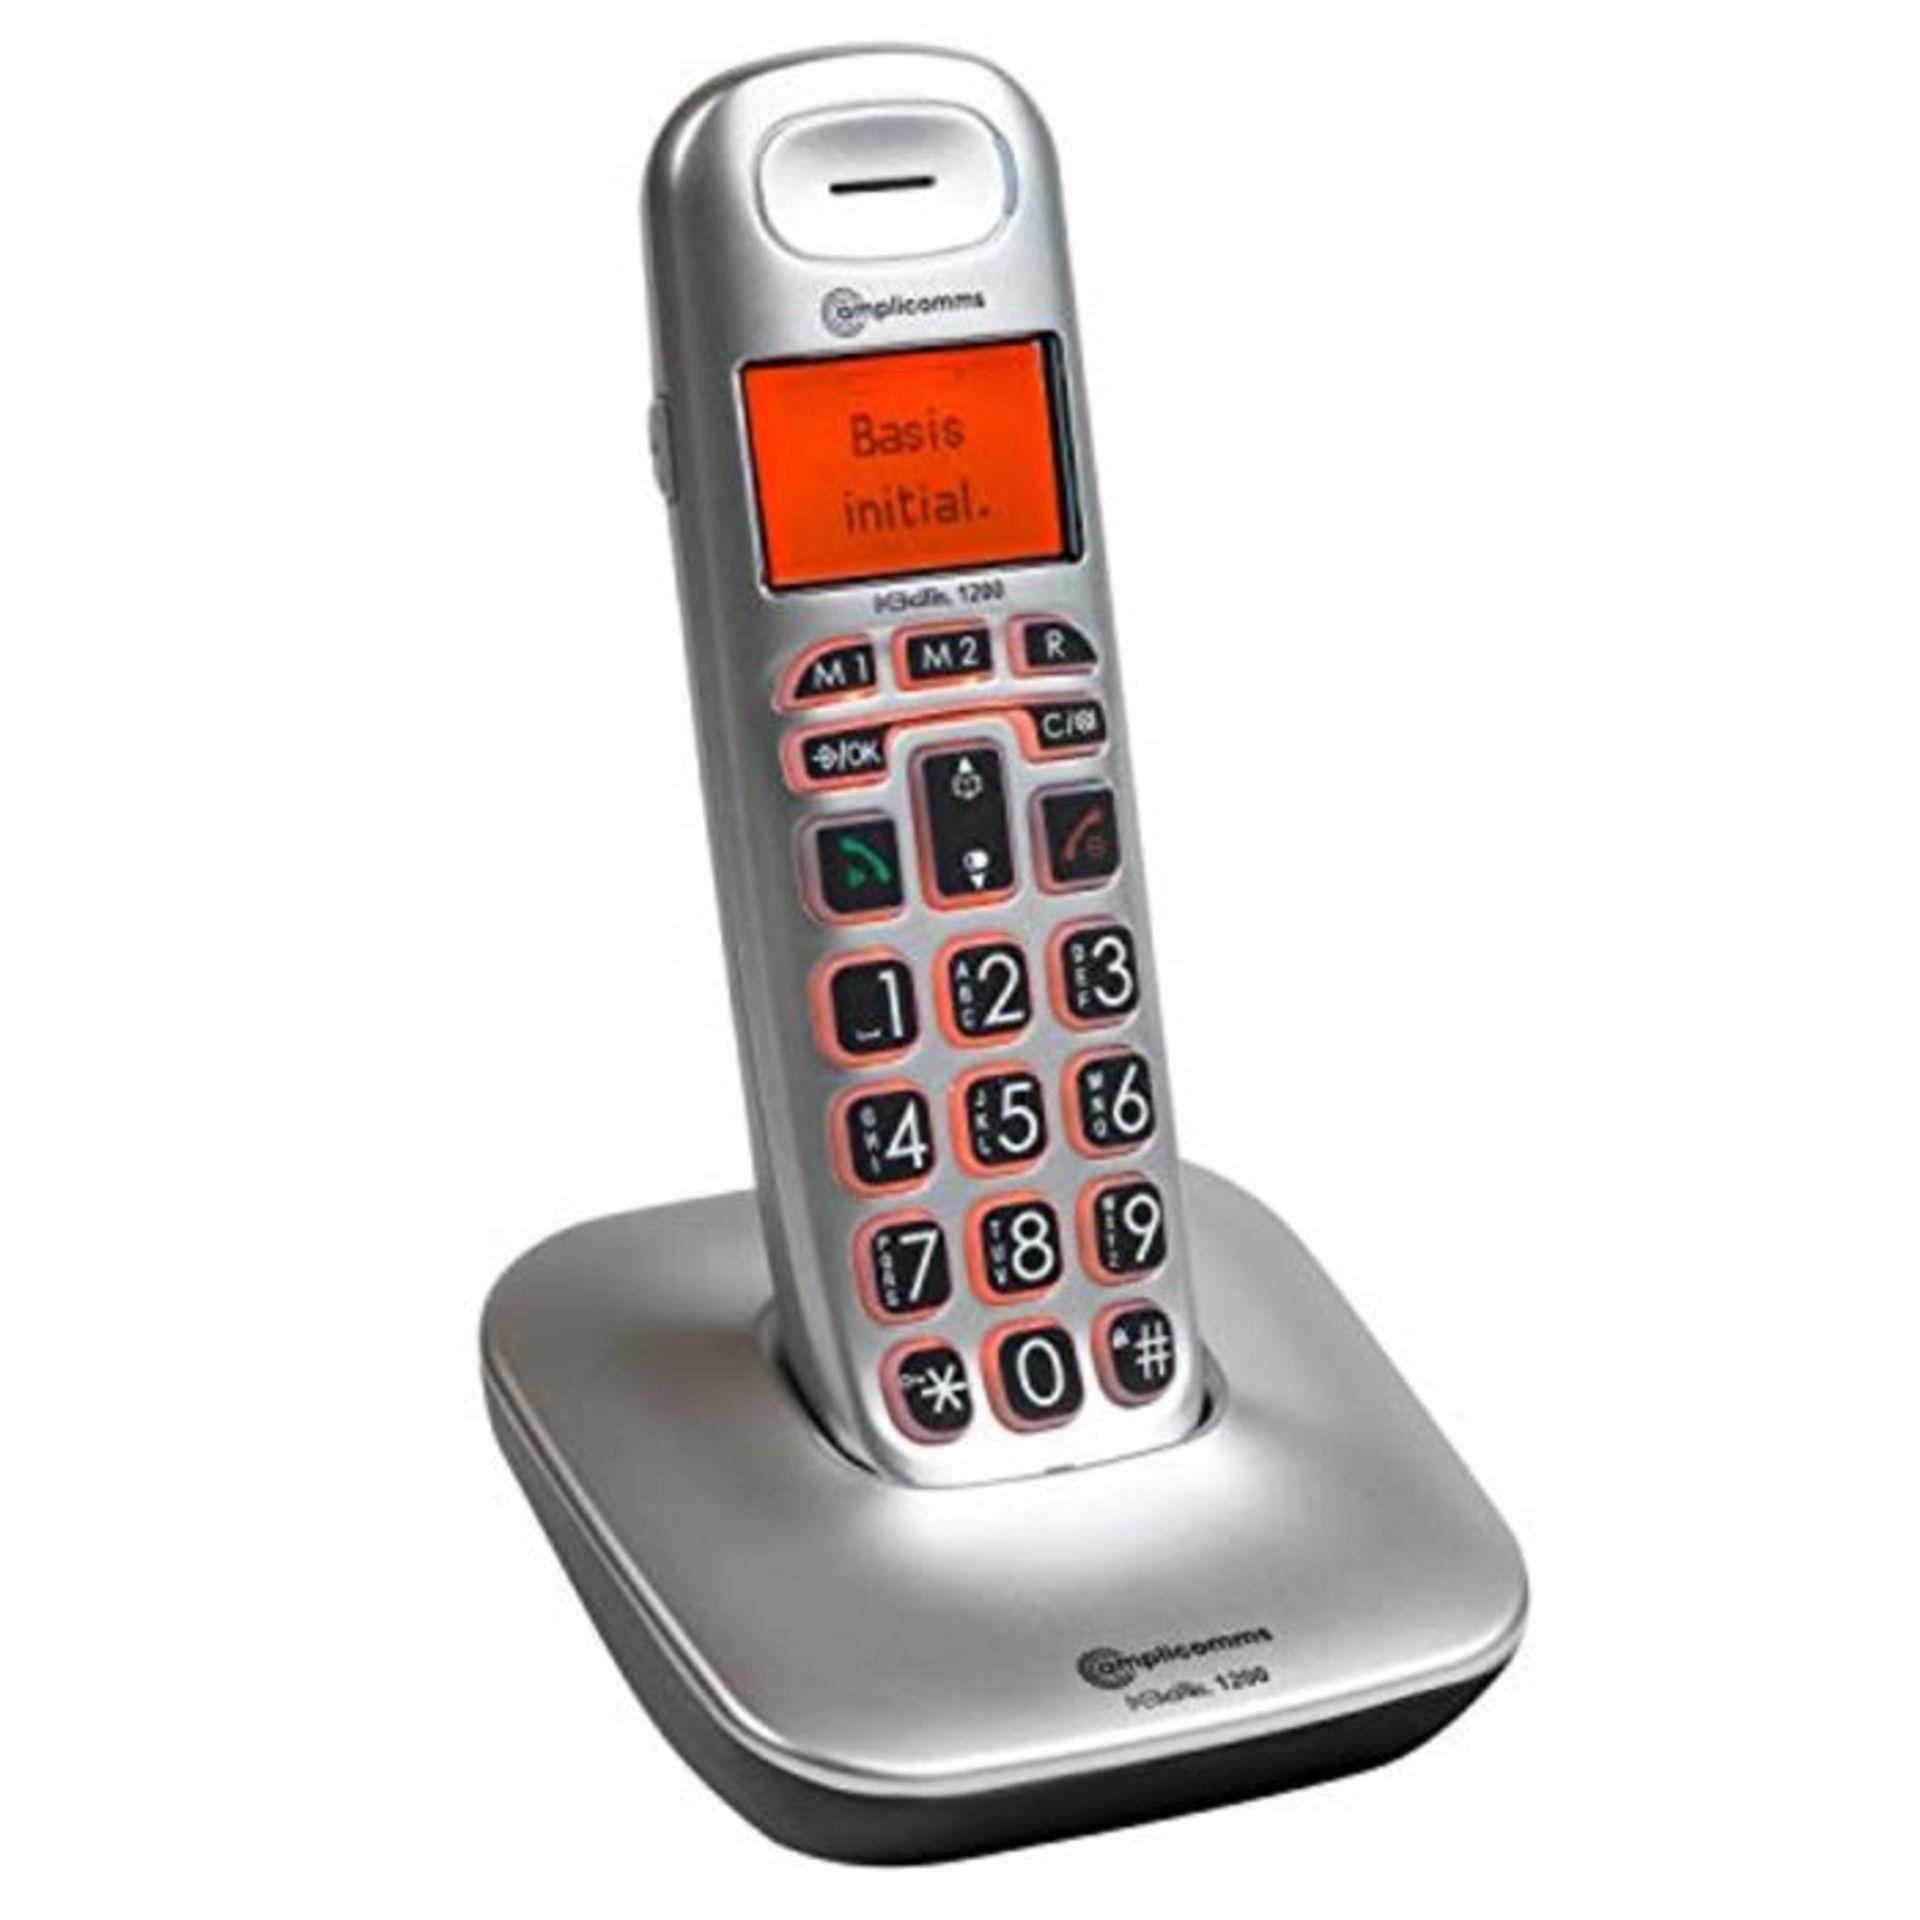 Amplicomms BigTel 1200 - Big Button Phone for Elderly - Loud Phones for Hard of Hearin - Image 2 of 2